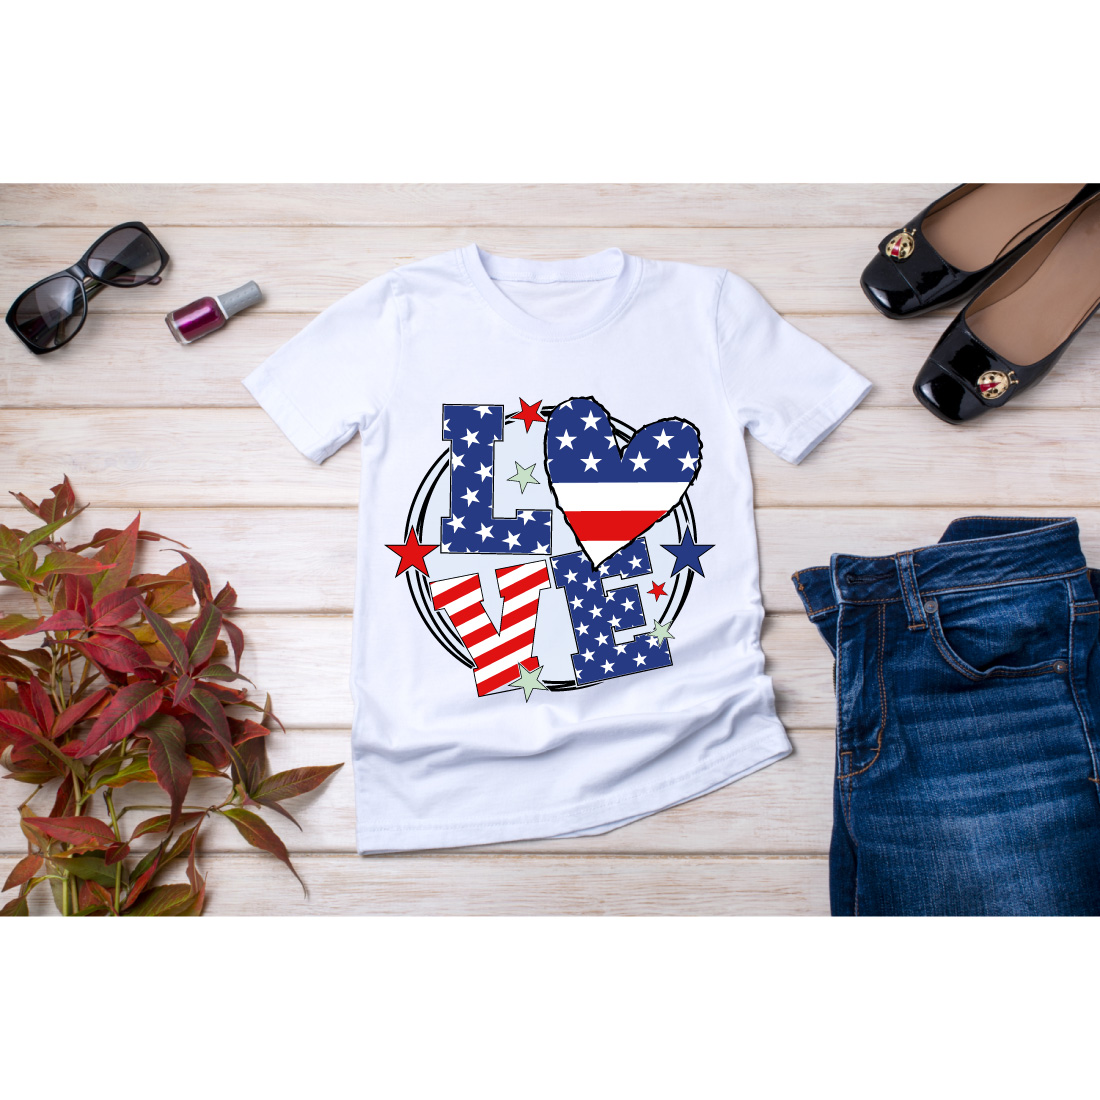 T-shirt American Flag Love Stars Design Preview image.